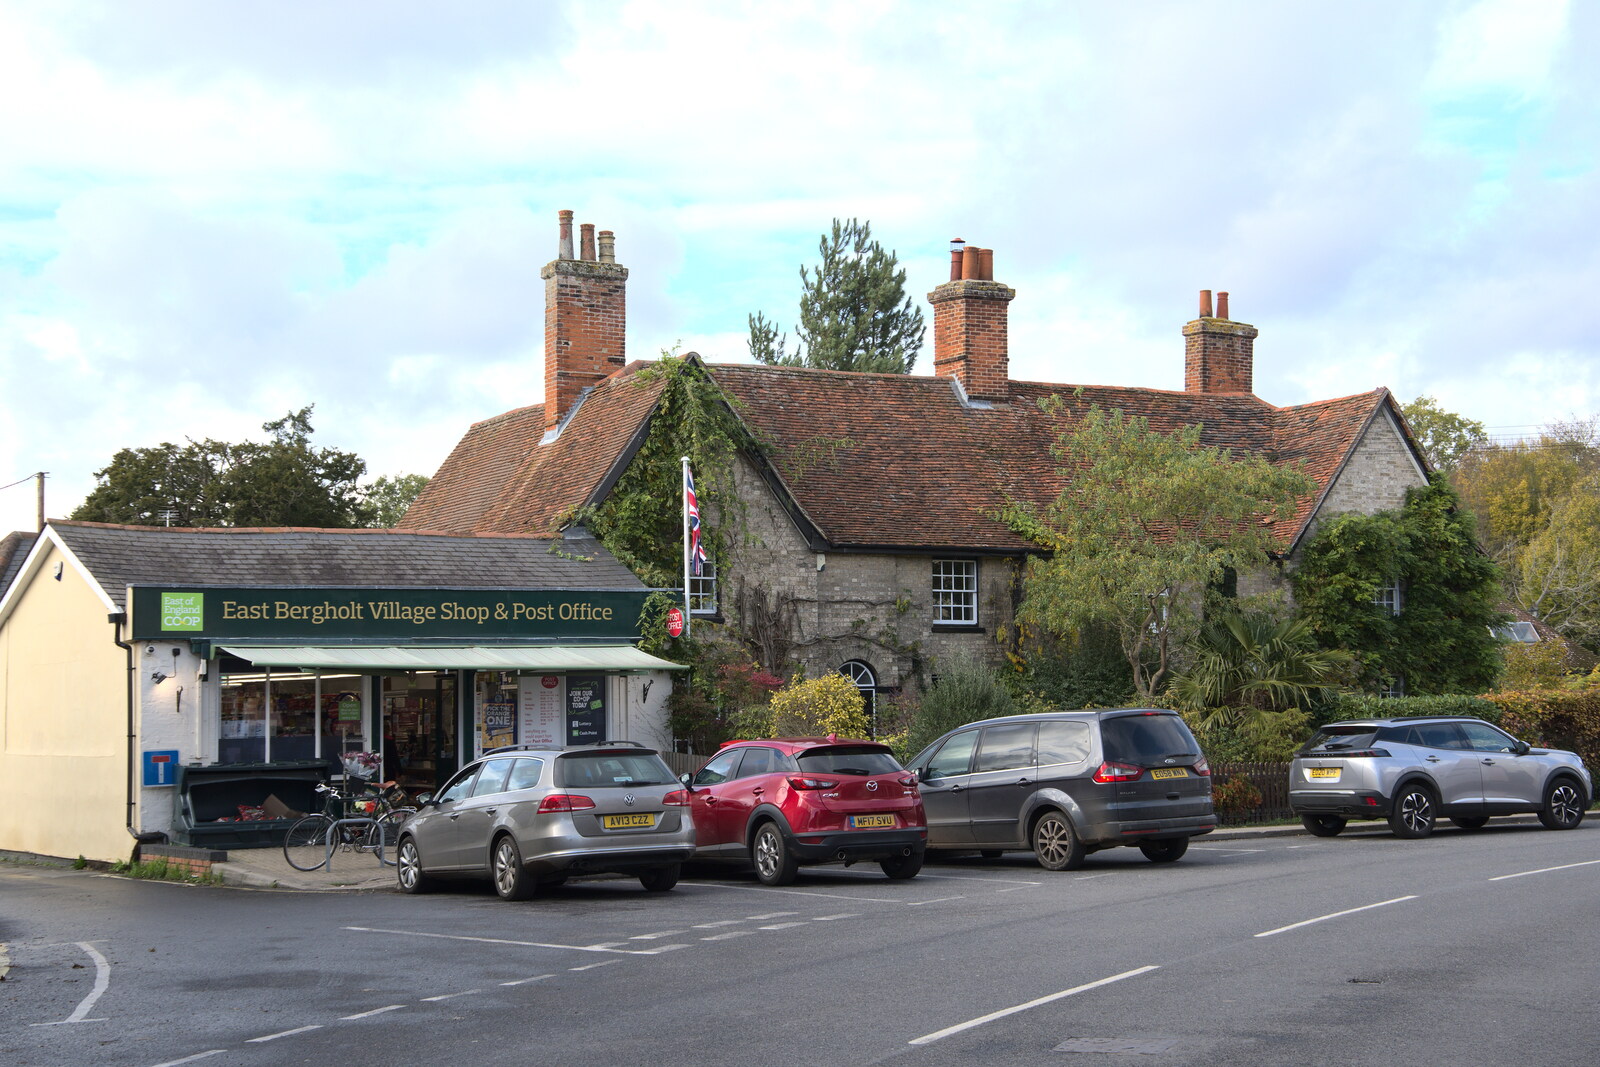 A Postcard from Flatford and Dedham, Suffolk and Essex, 9th November 2022: East Bergholt village shop